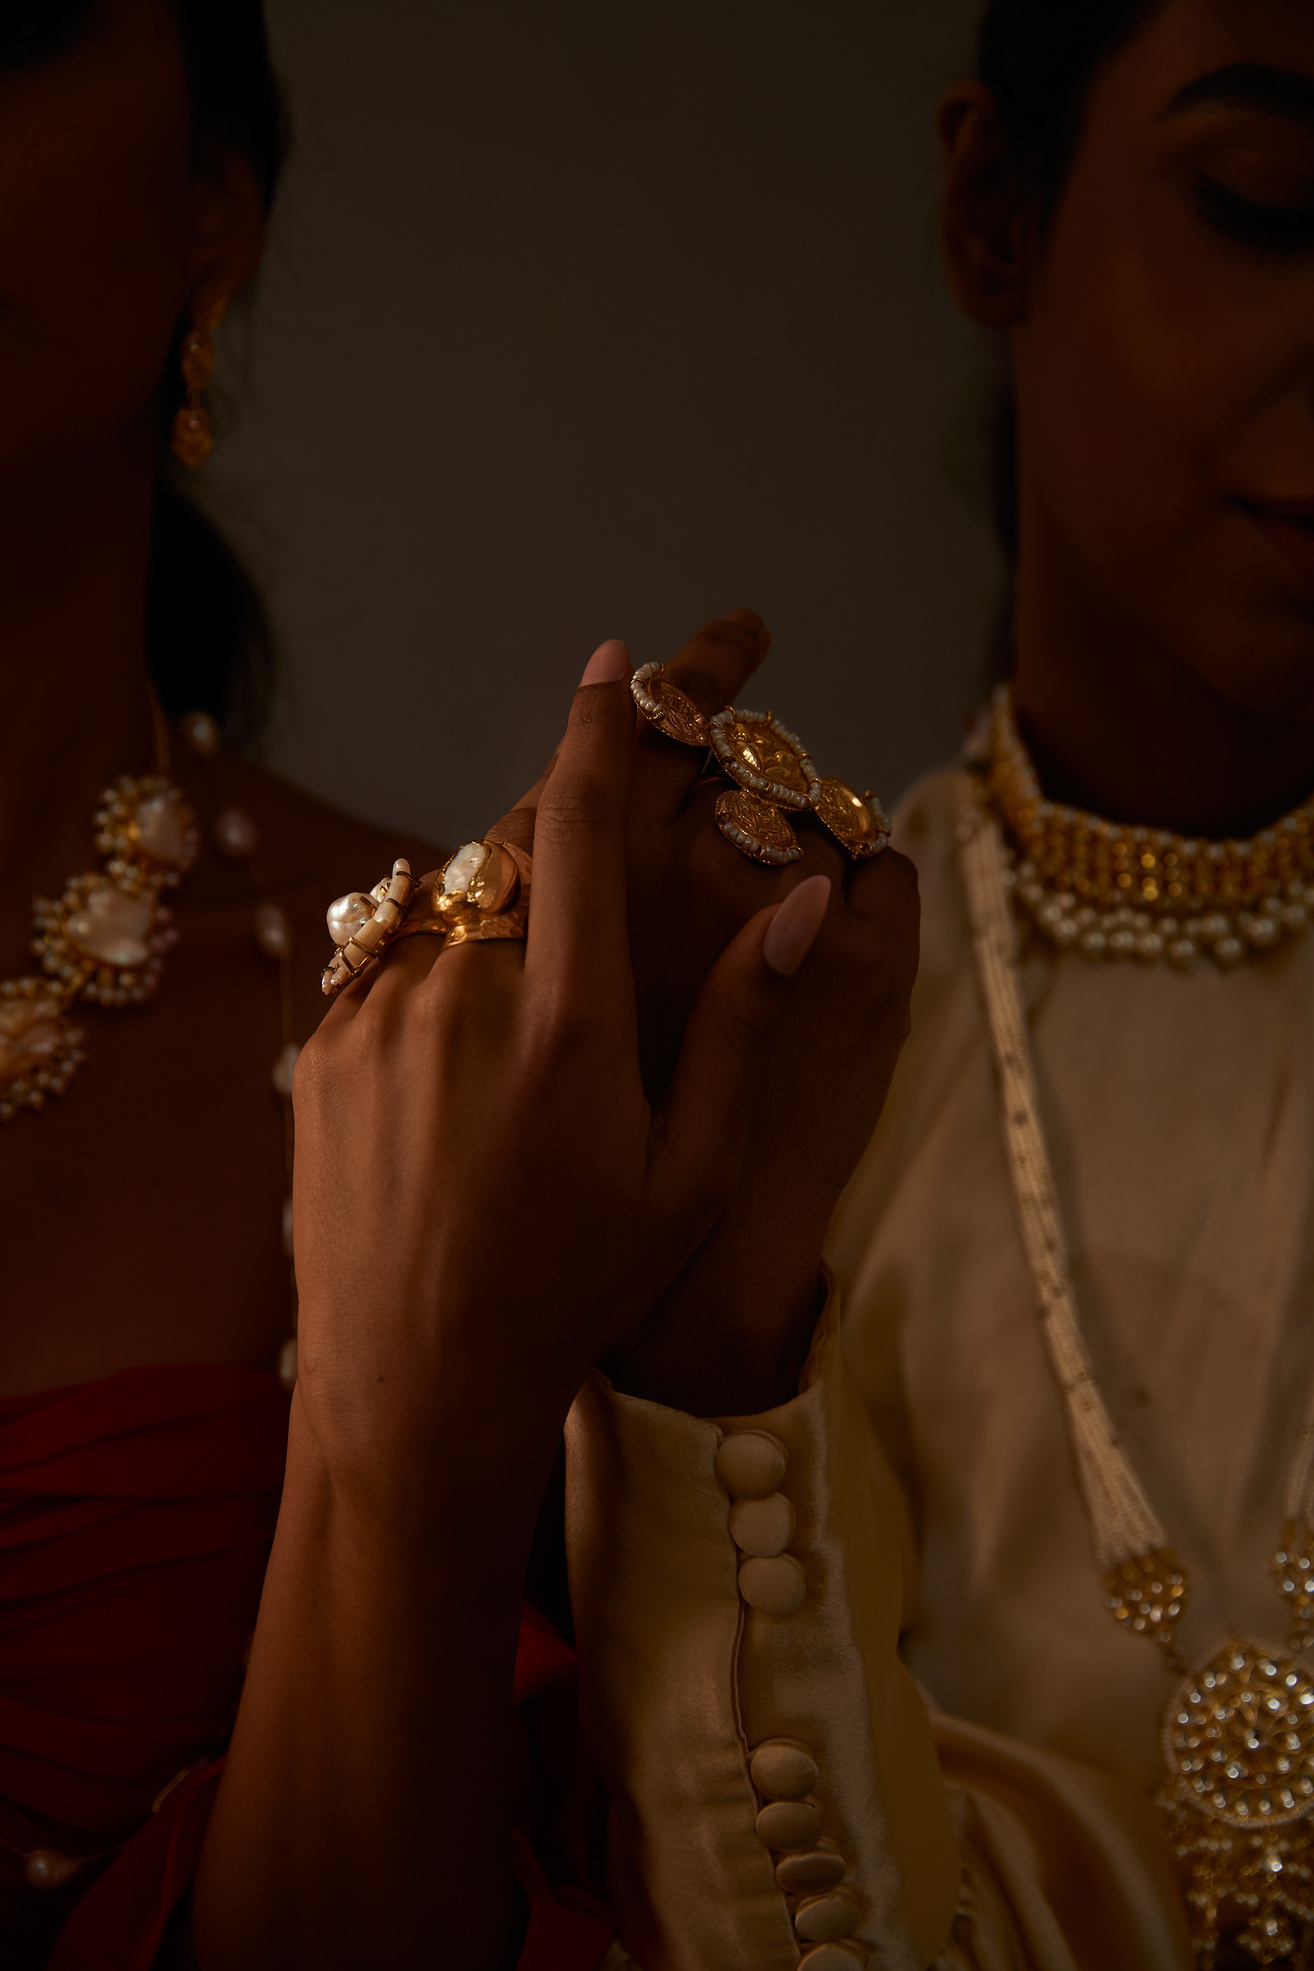 Women with Intricate Indian Jewelry